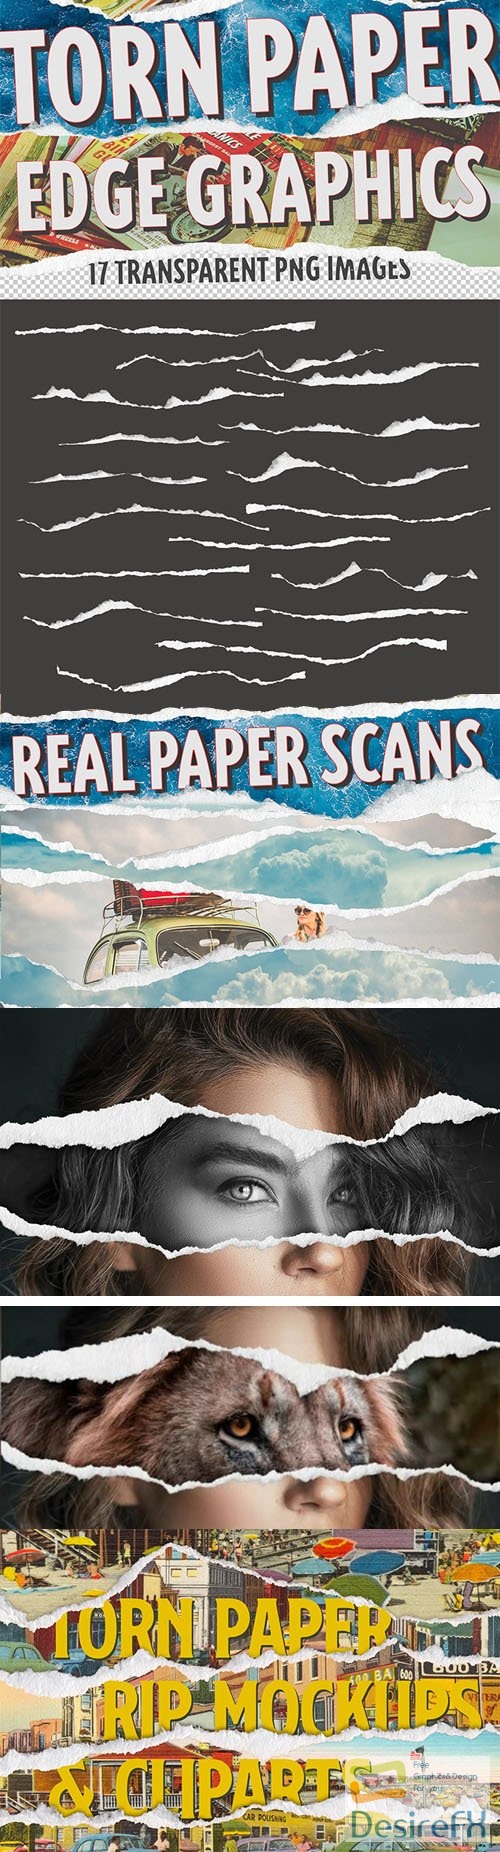 17 Torn Paper Edges - Real Paper Scans